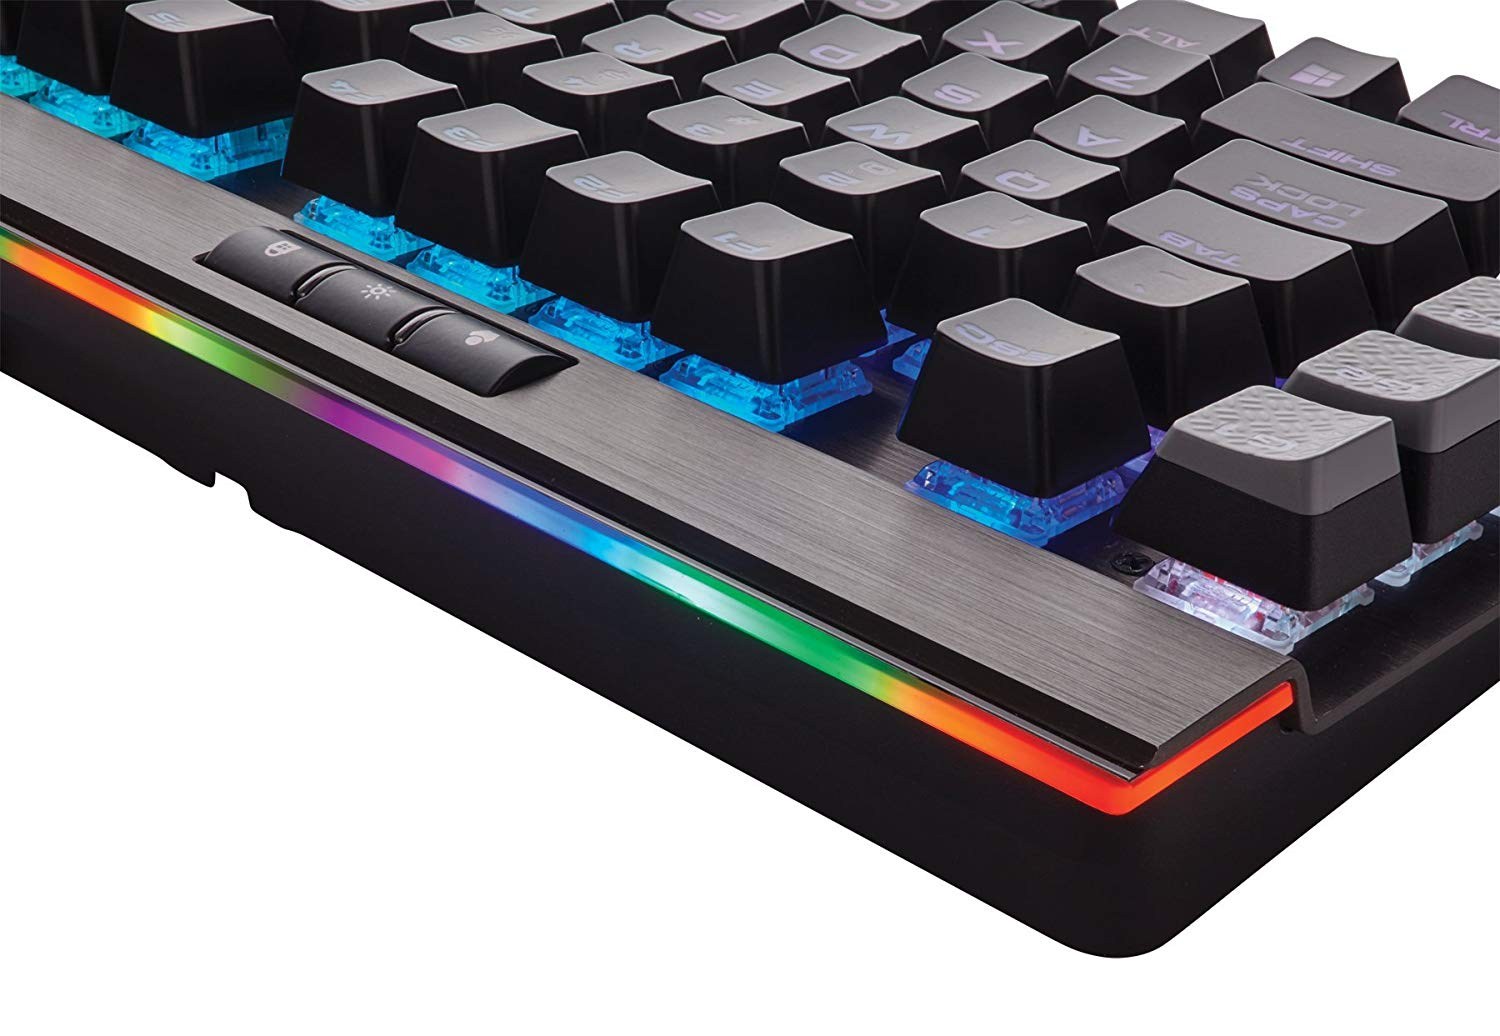 Gamers swear by mechanical keyboards and there has been a big movement toward them in recent years.<br><br>Get an edge on the PC <a href="https://amzn.to/2IP8RRg" target="_blank" "nofollow">here</a>.